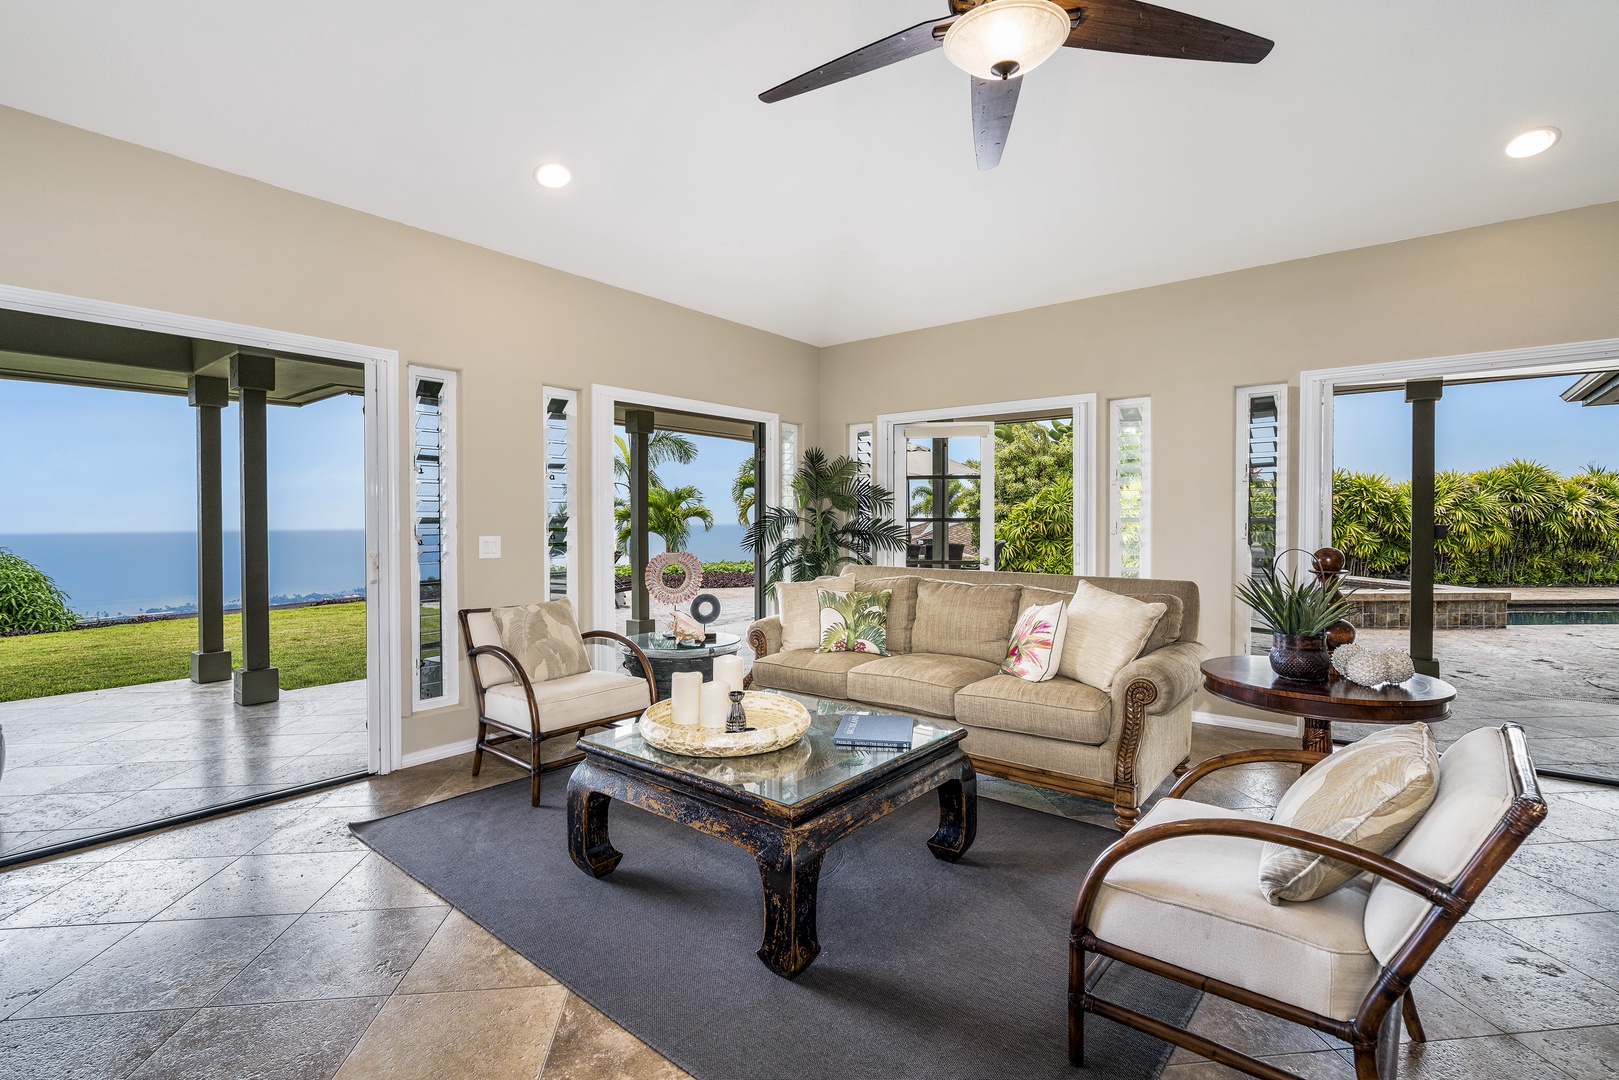 Kailua Kona Vacation Rentals, Sunset Hale - French doors throughout the house allow for excellent cross ventilation!